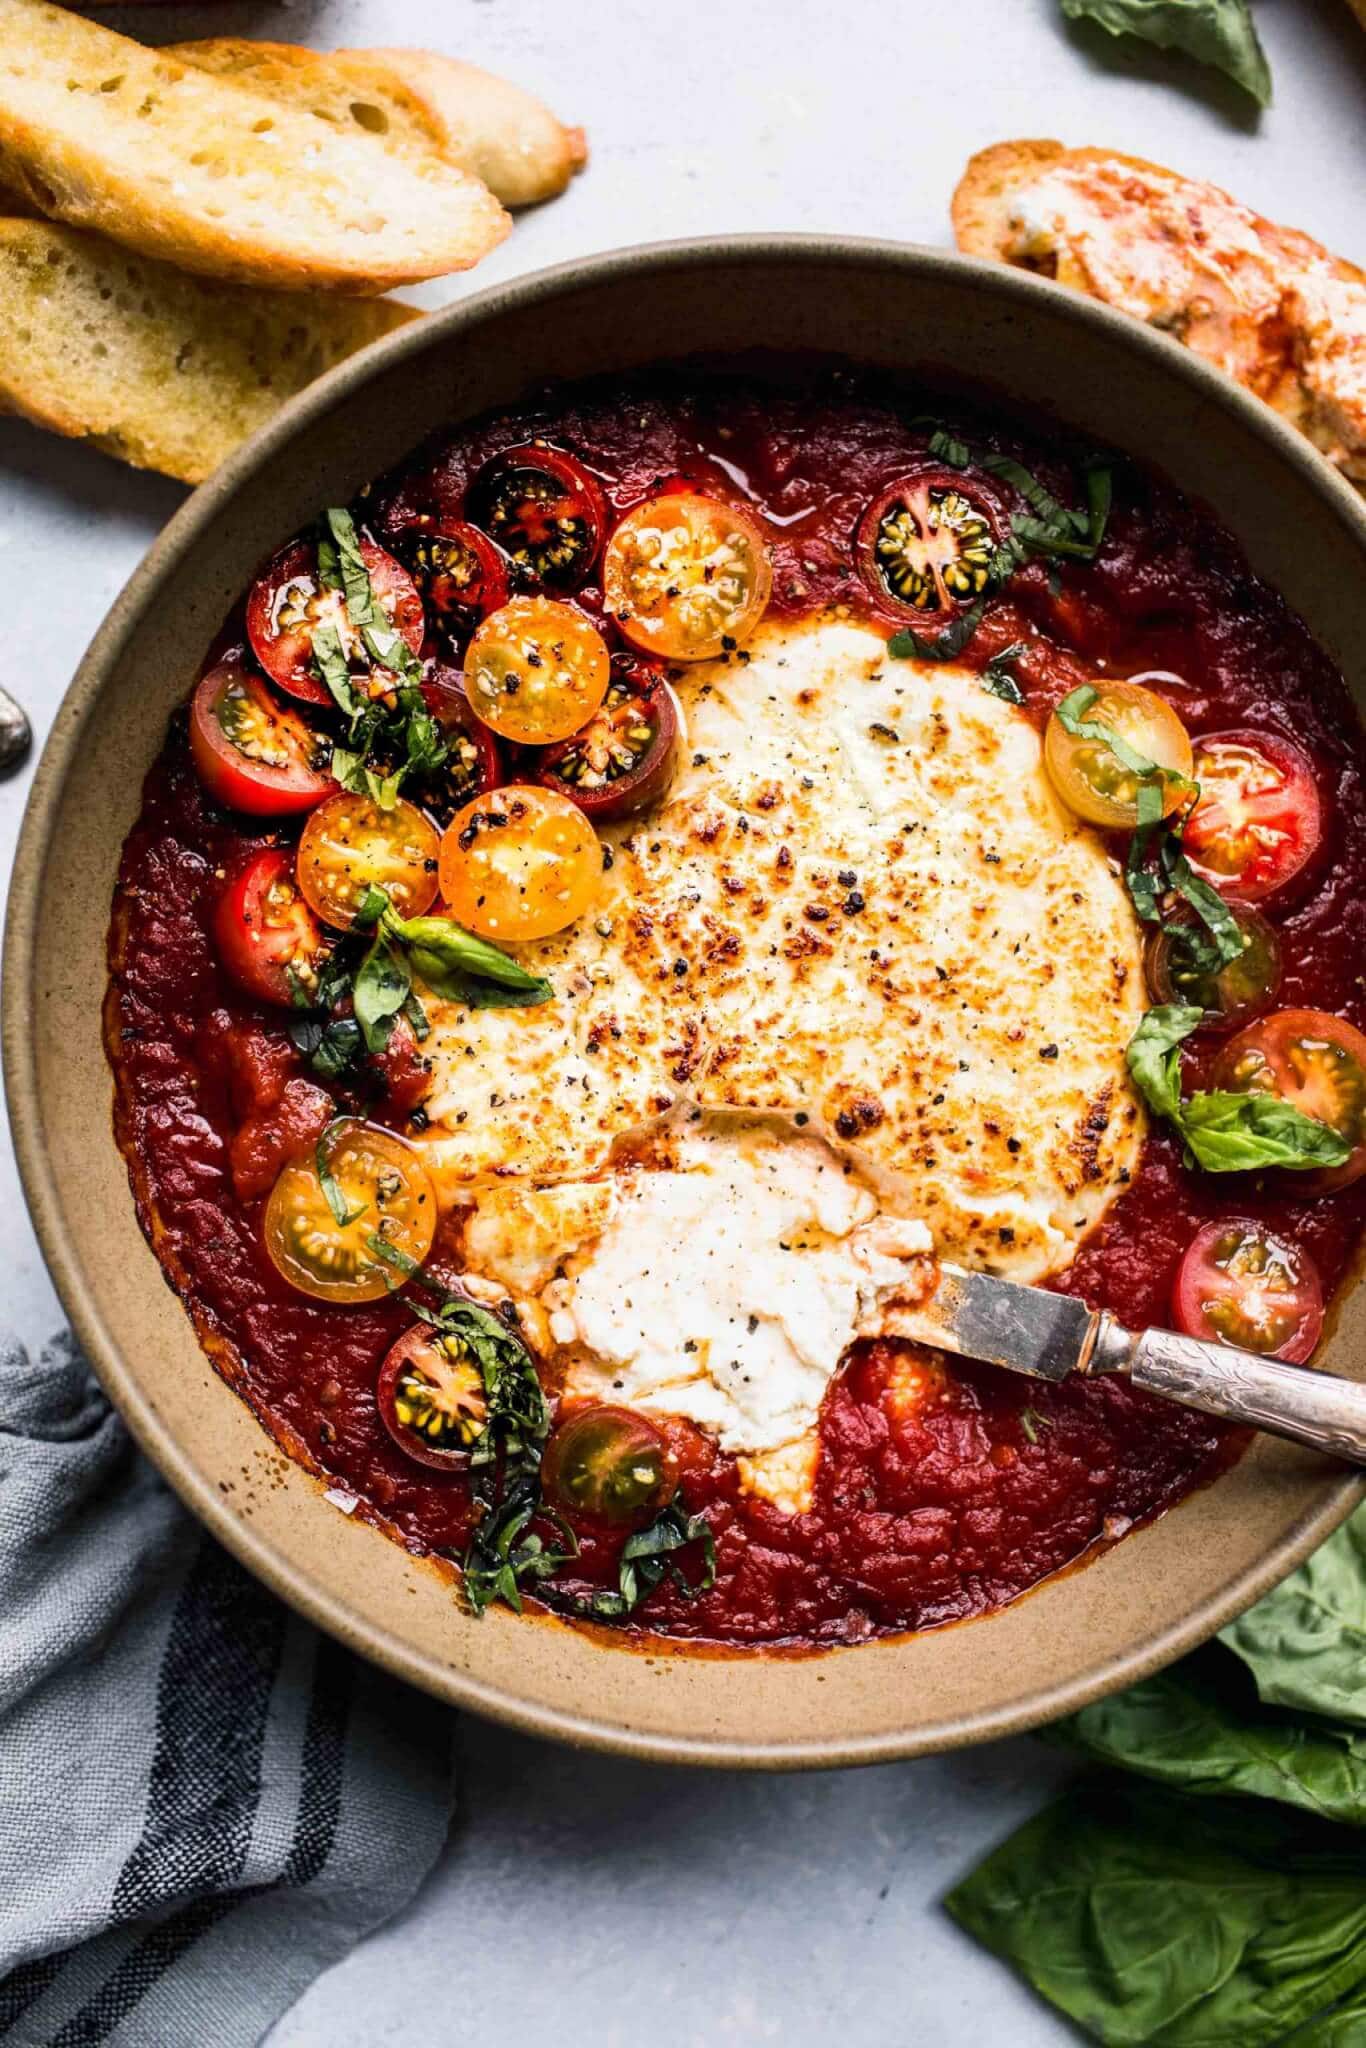 This baked goat cheese dip is a super simple appetizer recipe that's easy to throw together at the last minute with just 3 ingredients! Chevre is baked in marinara sauce until hot and bubbly – Perfect for spreading on crostini.